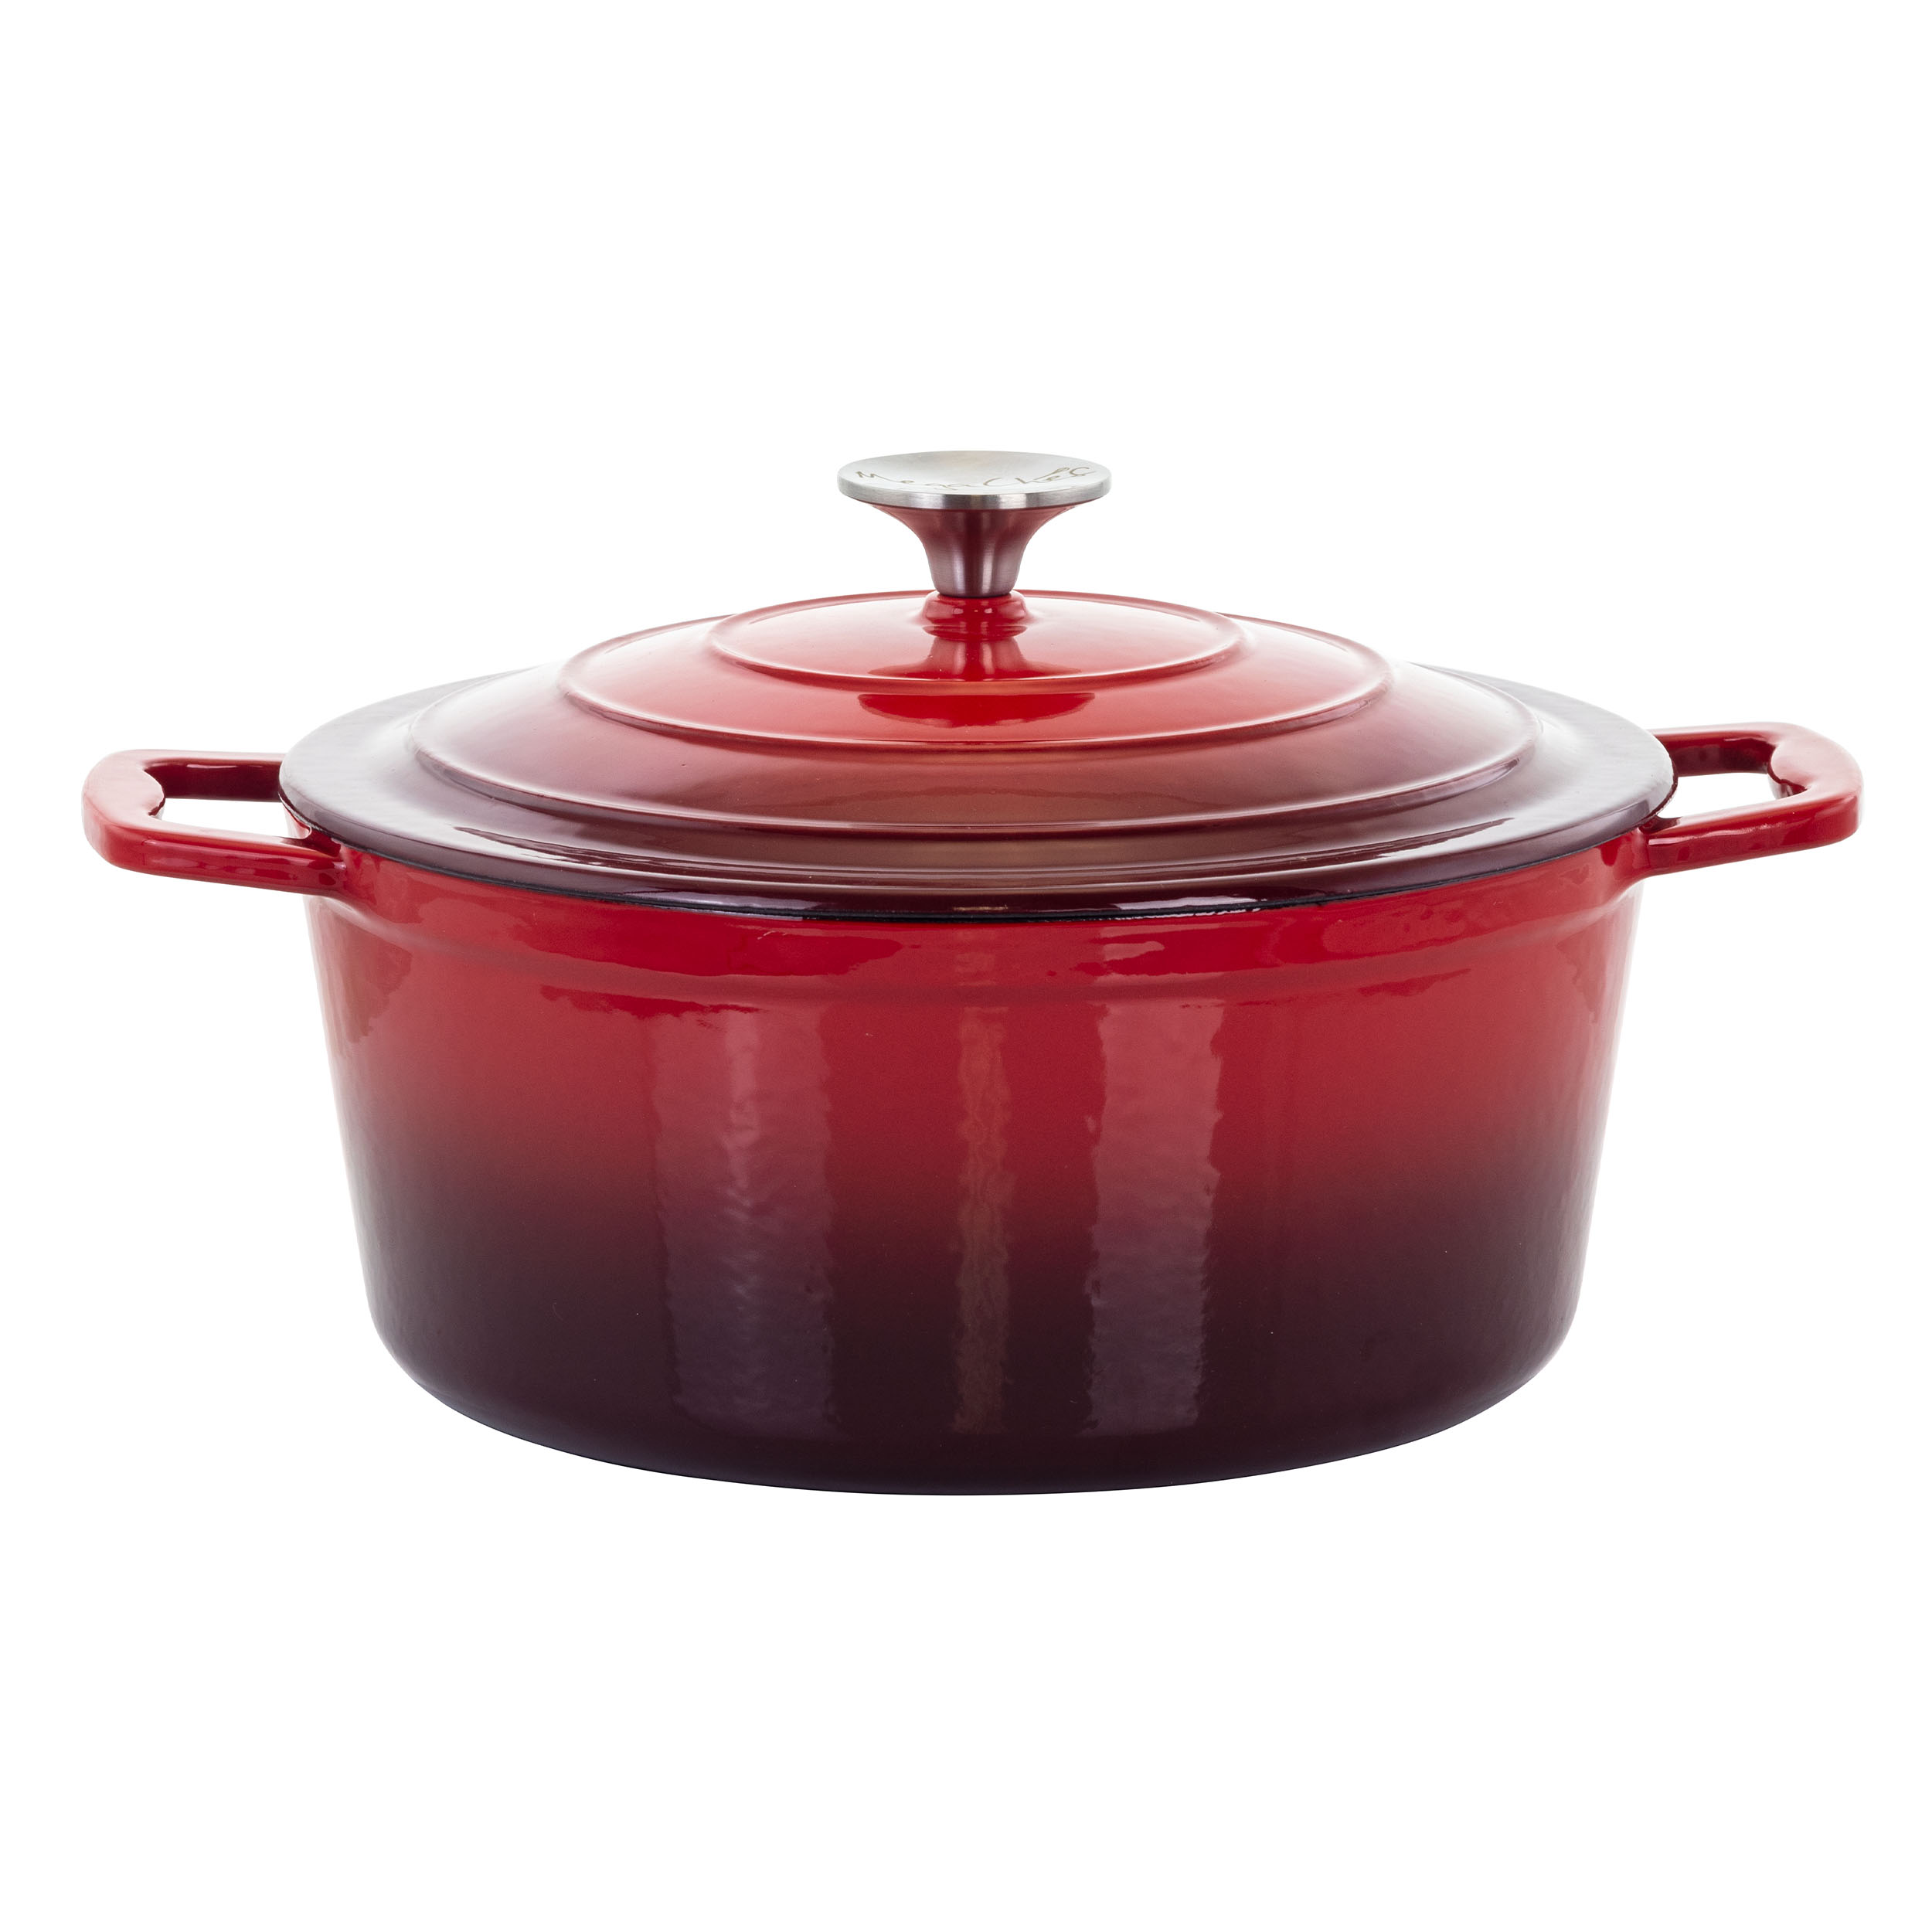 MegaChef 14 Inch Square Enamel Cast Iron Grill Pan in Red with Press